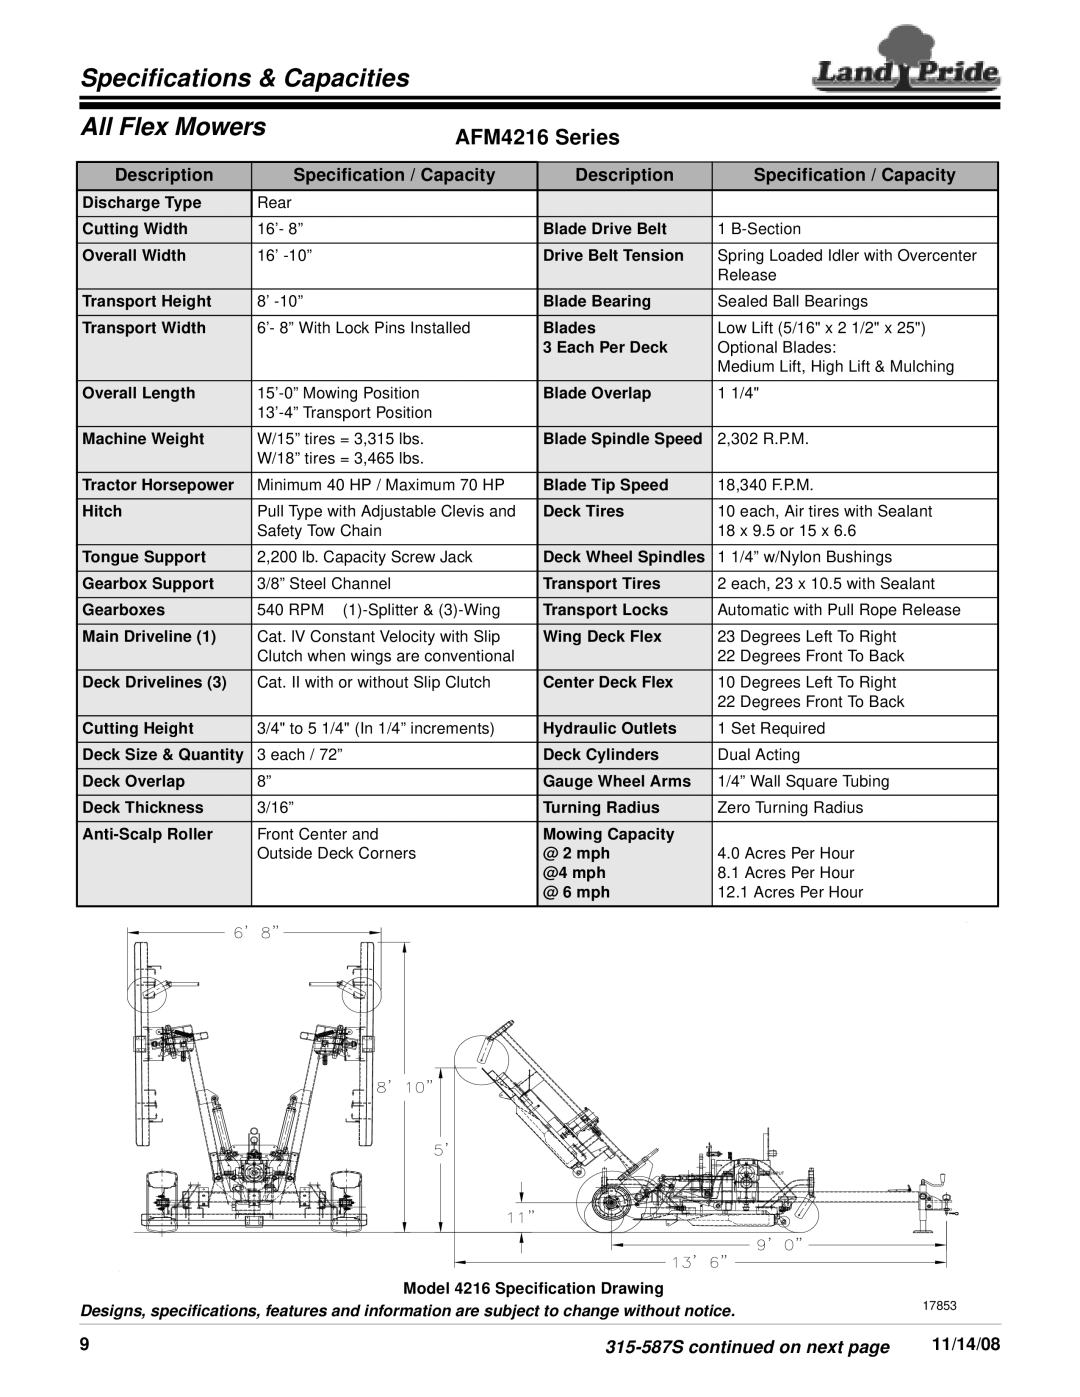 Land Pride AFM4214 Series Specifications & Capacities, All Flex Mowers, AFM4216 Series, 315-587Scontinued on next page 